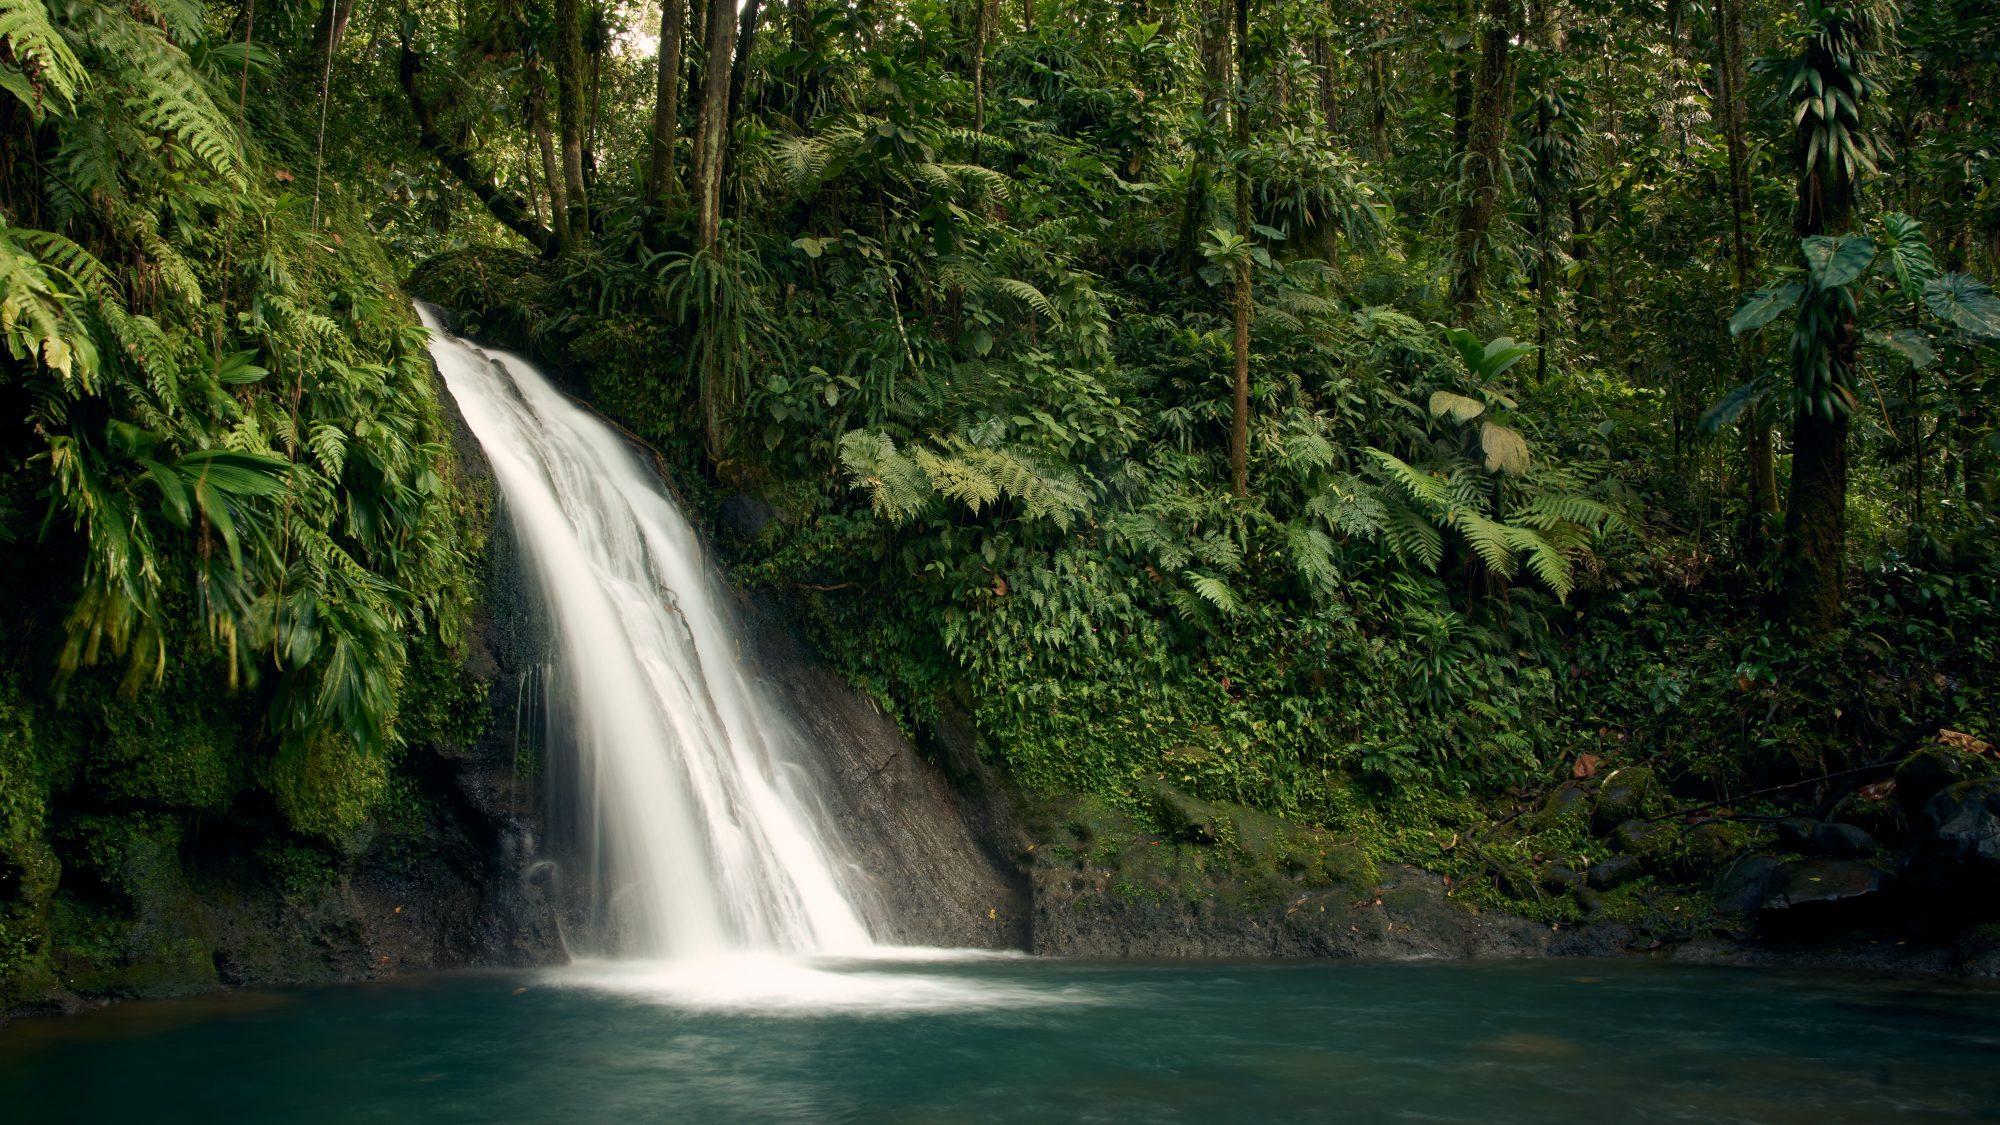 Waterfall in a tropical environment